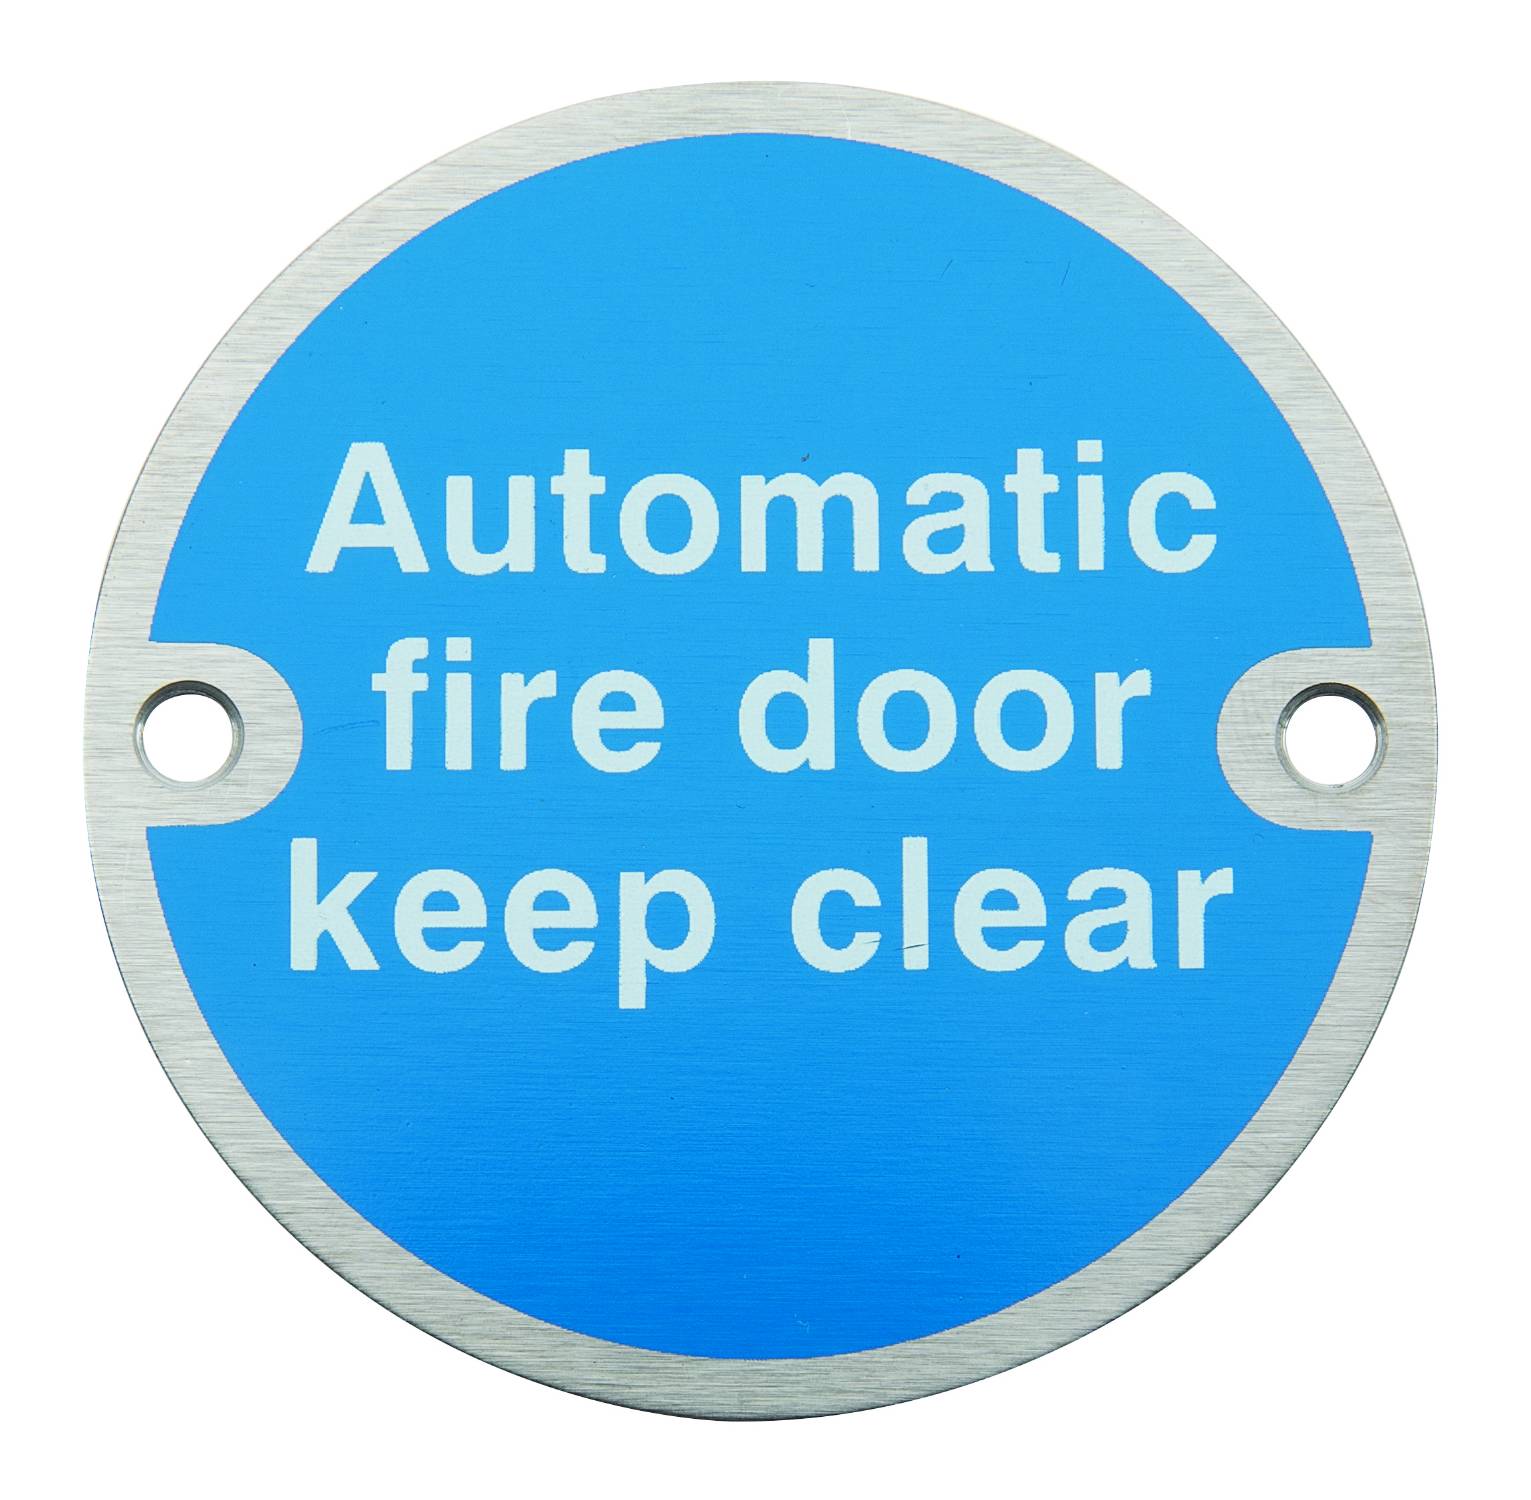 HUKP-0105-26 – Automatic Fire Door Keep Clear - Fire signage